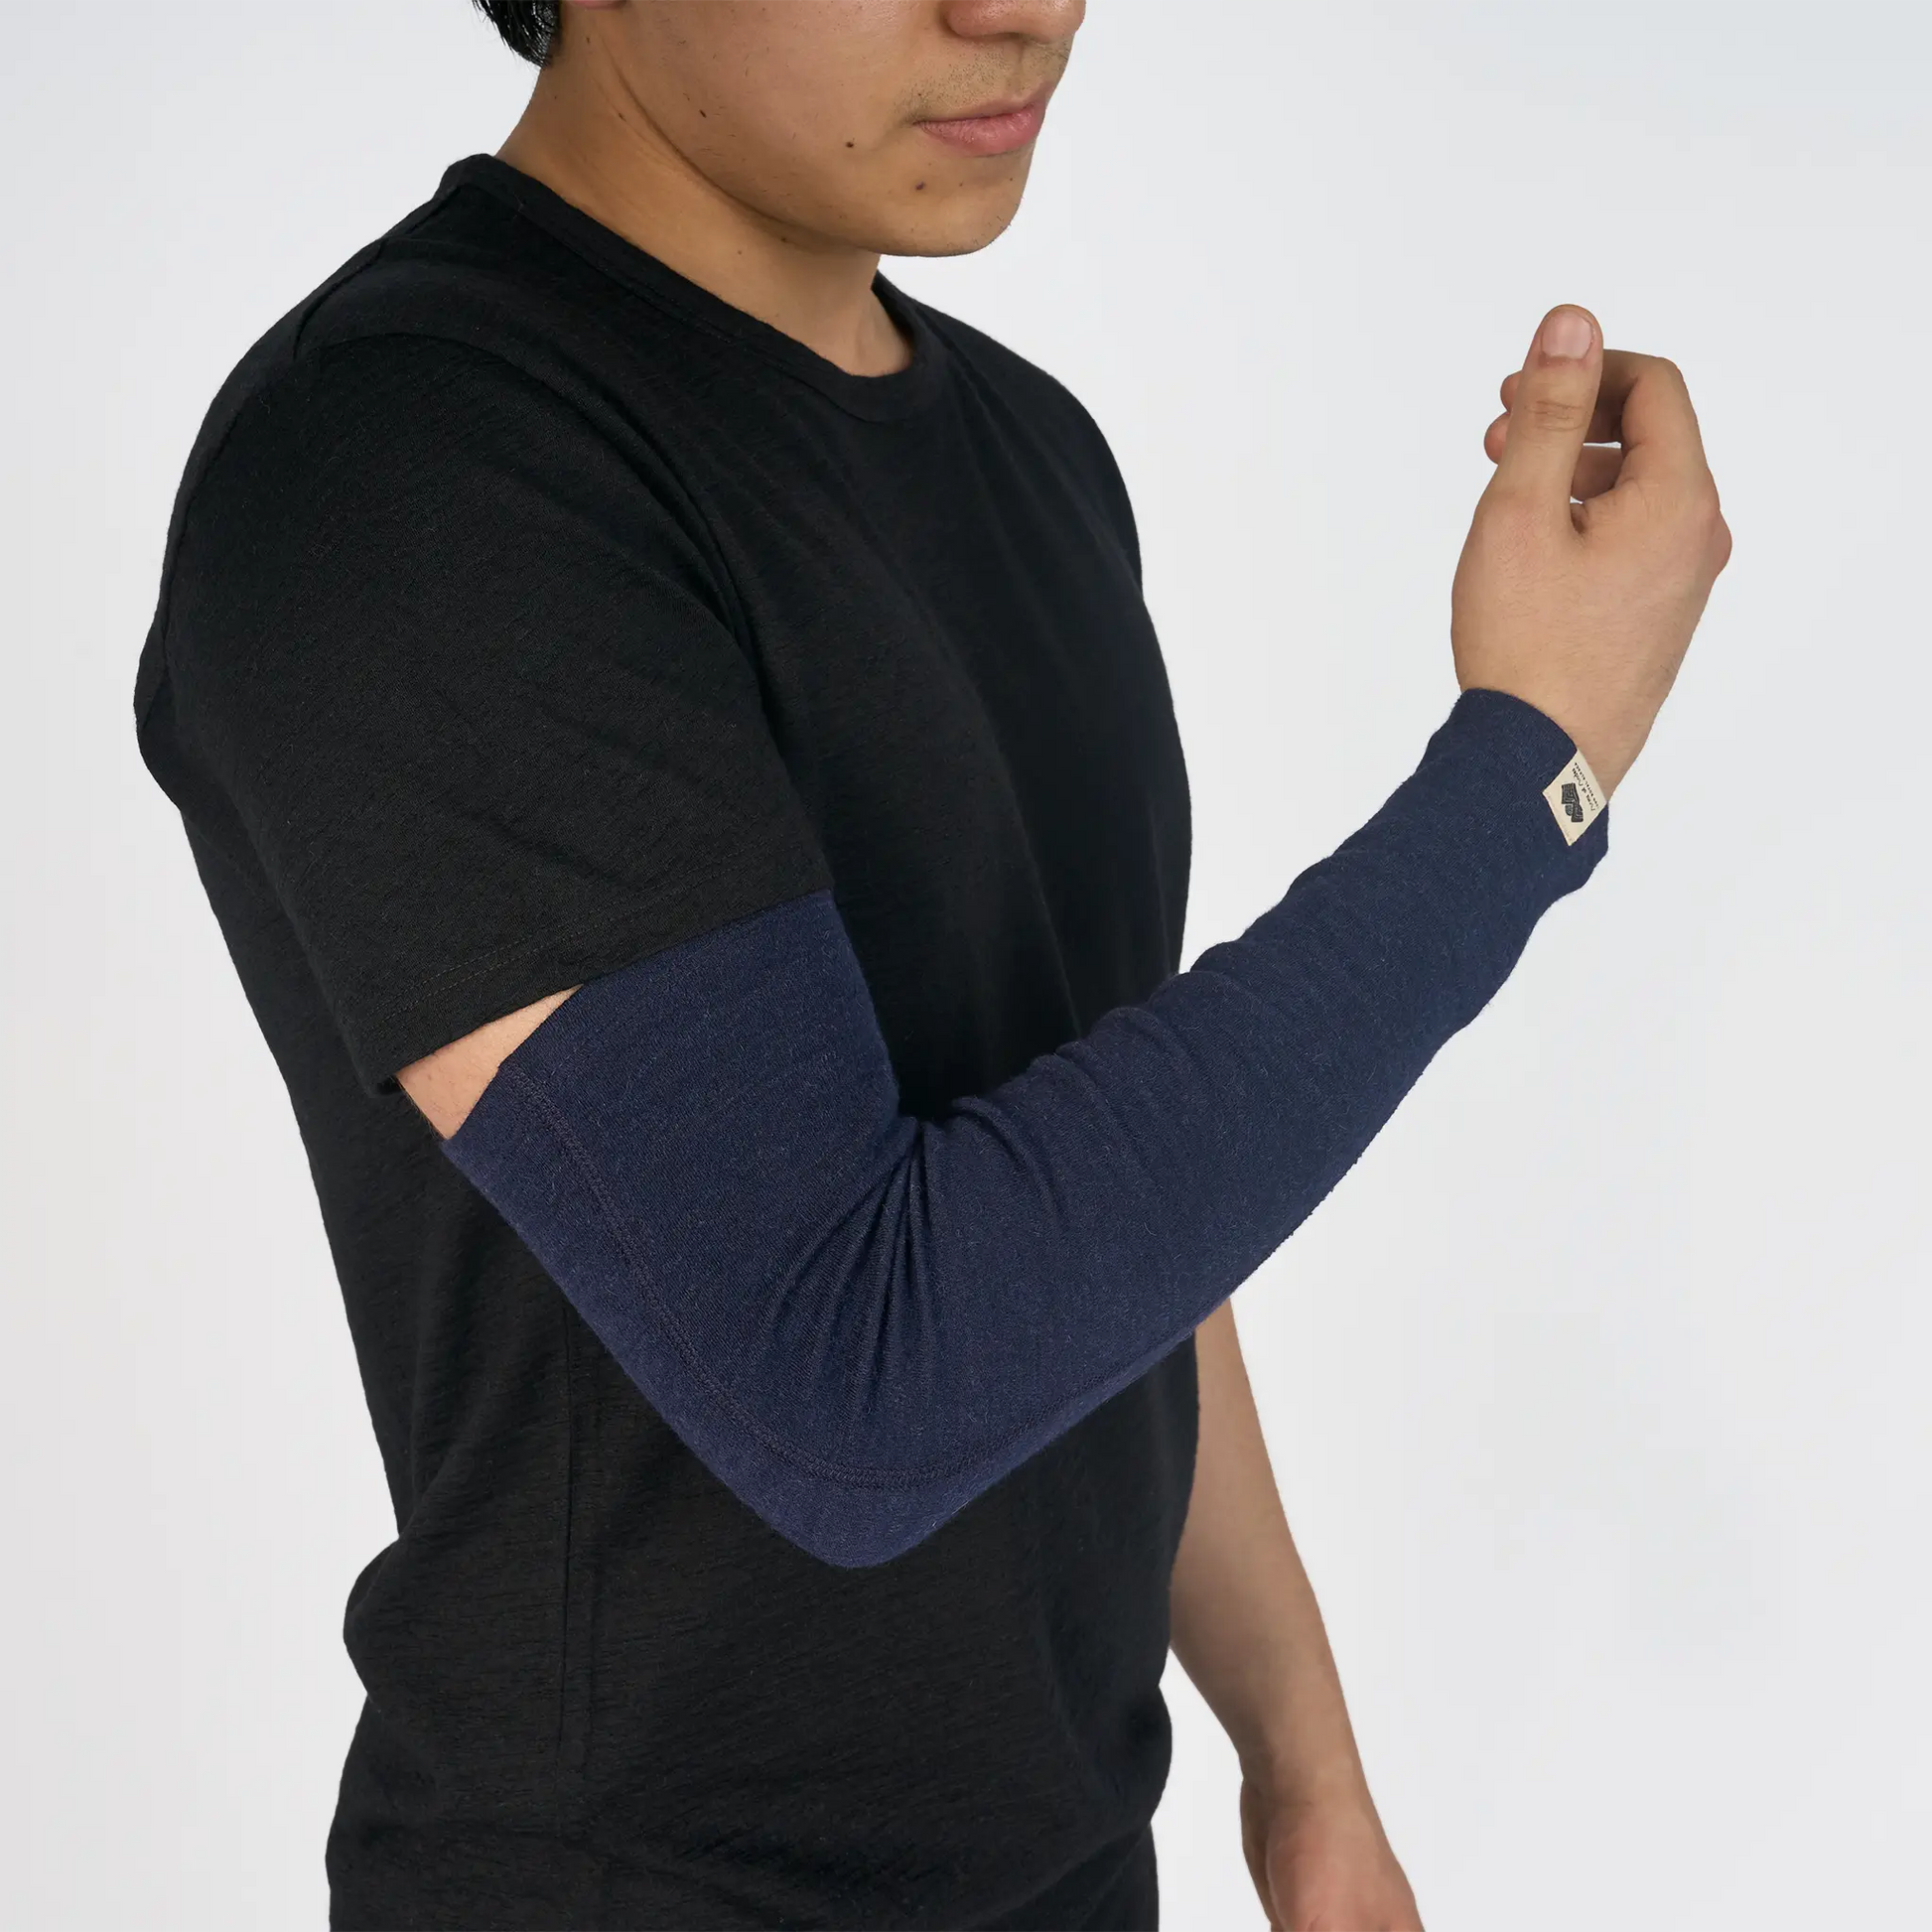 mens wind protection sleeve lightweight color navy blue